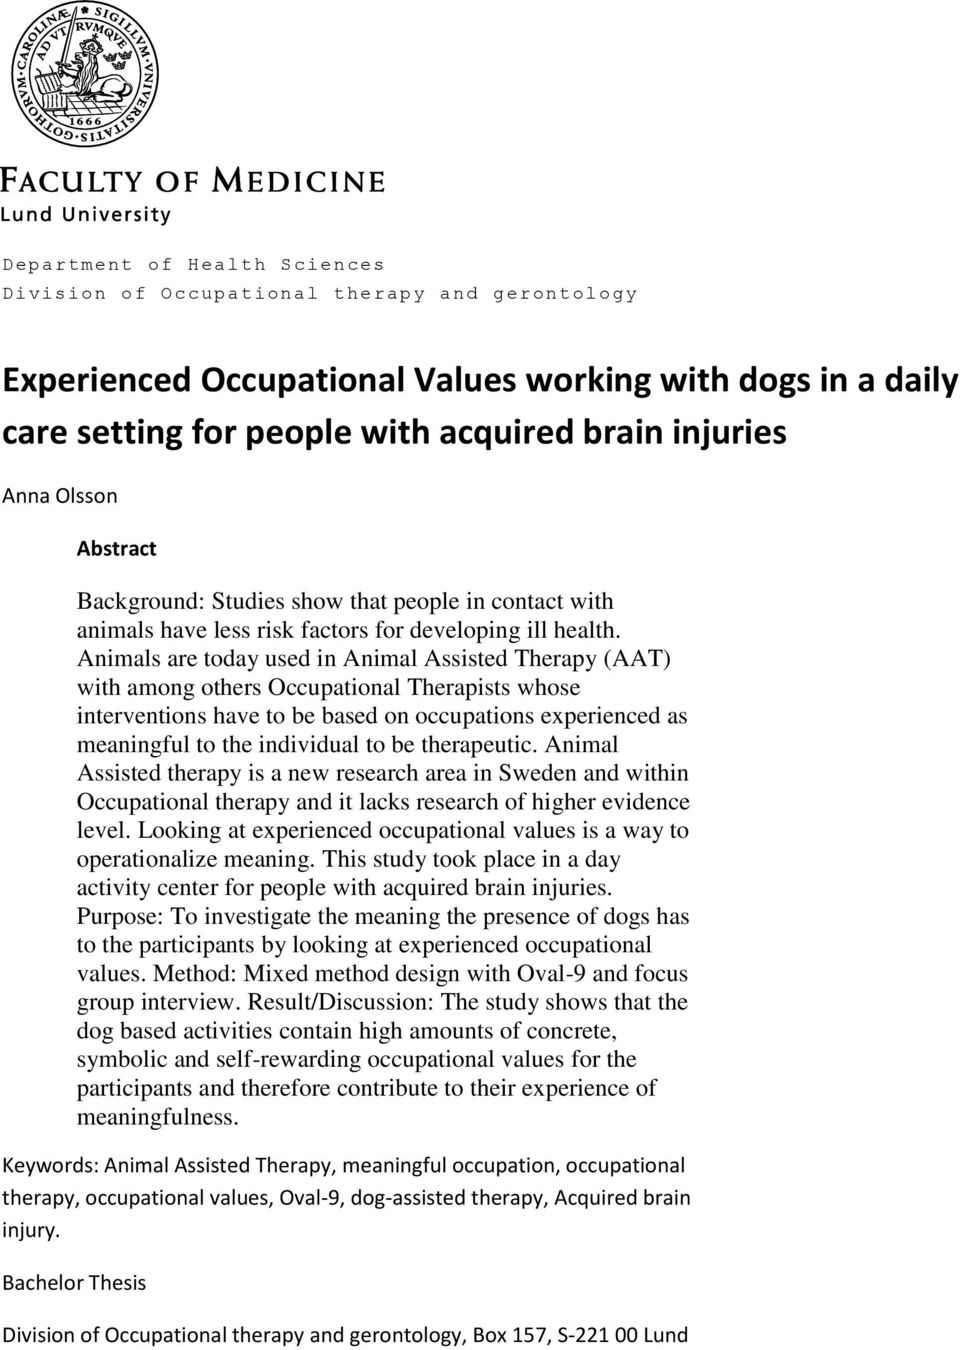 Animals are today used in Animal Assisted Therapy (AAT) with among others Occupational Therapists whose interventions have to be based on occupations experienced as meaningful to the individual to be